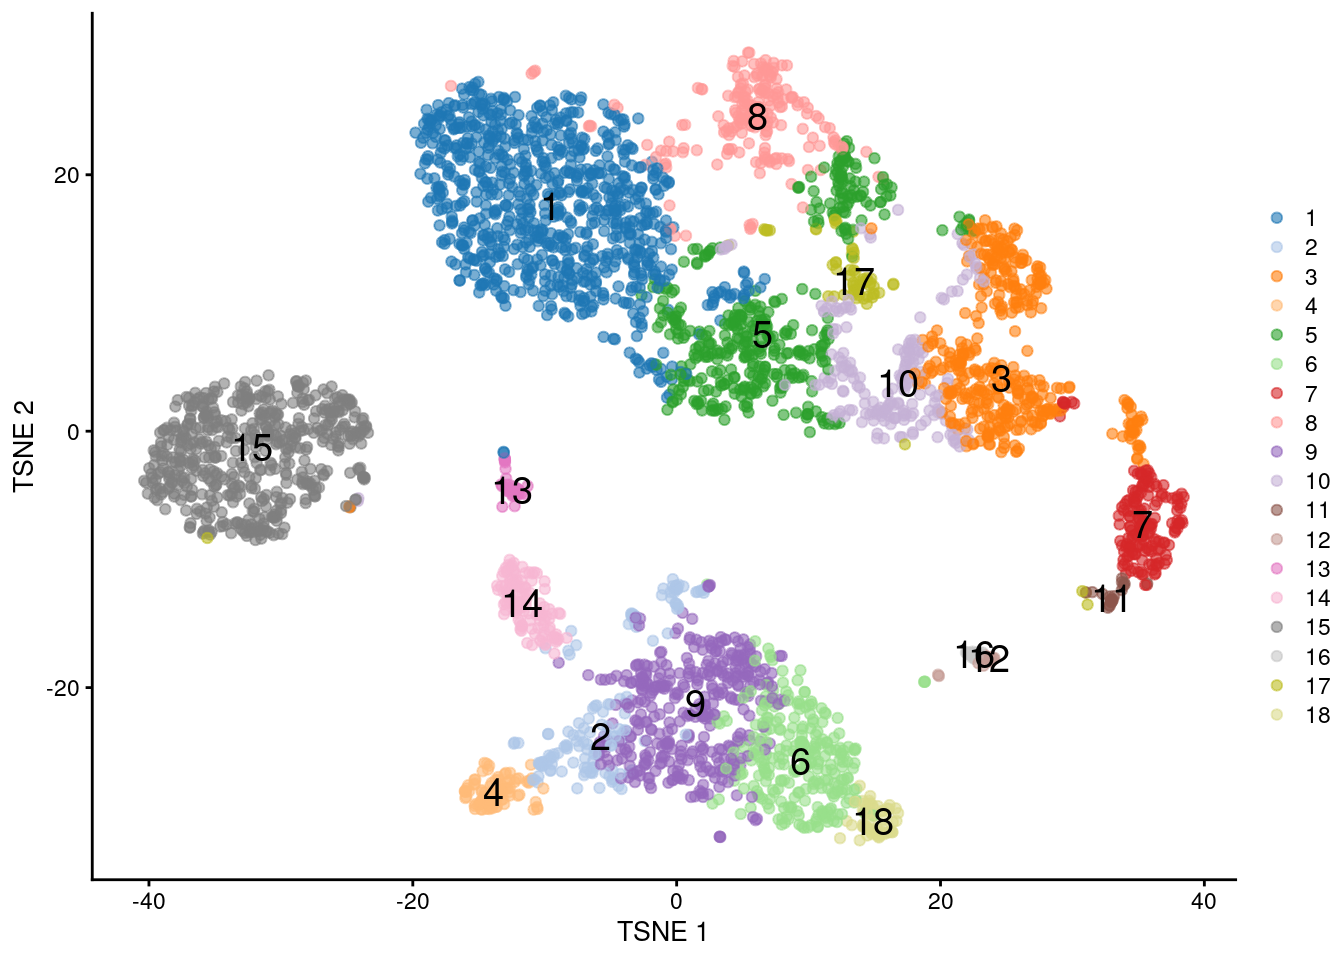 $t$-SNE plot of the PBMC dataset, where each point represents a cell and is coloured according to the identity of the assigned cluster from combined $k$-means/affinity propagation clustering.